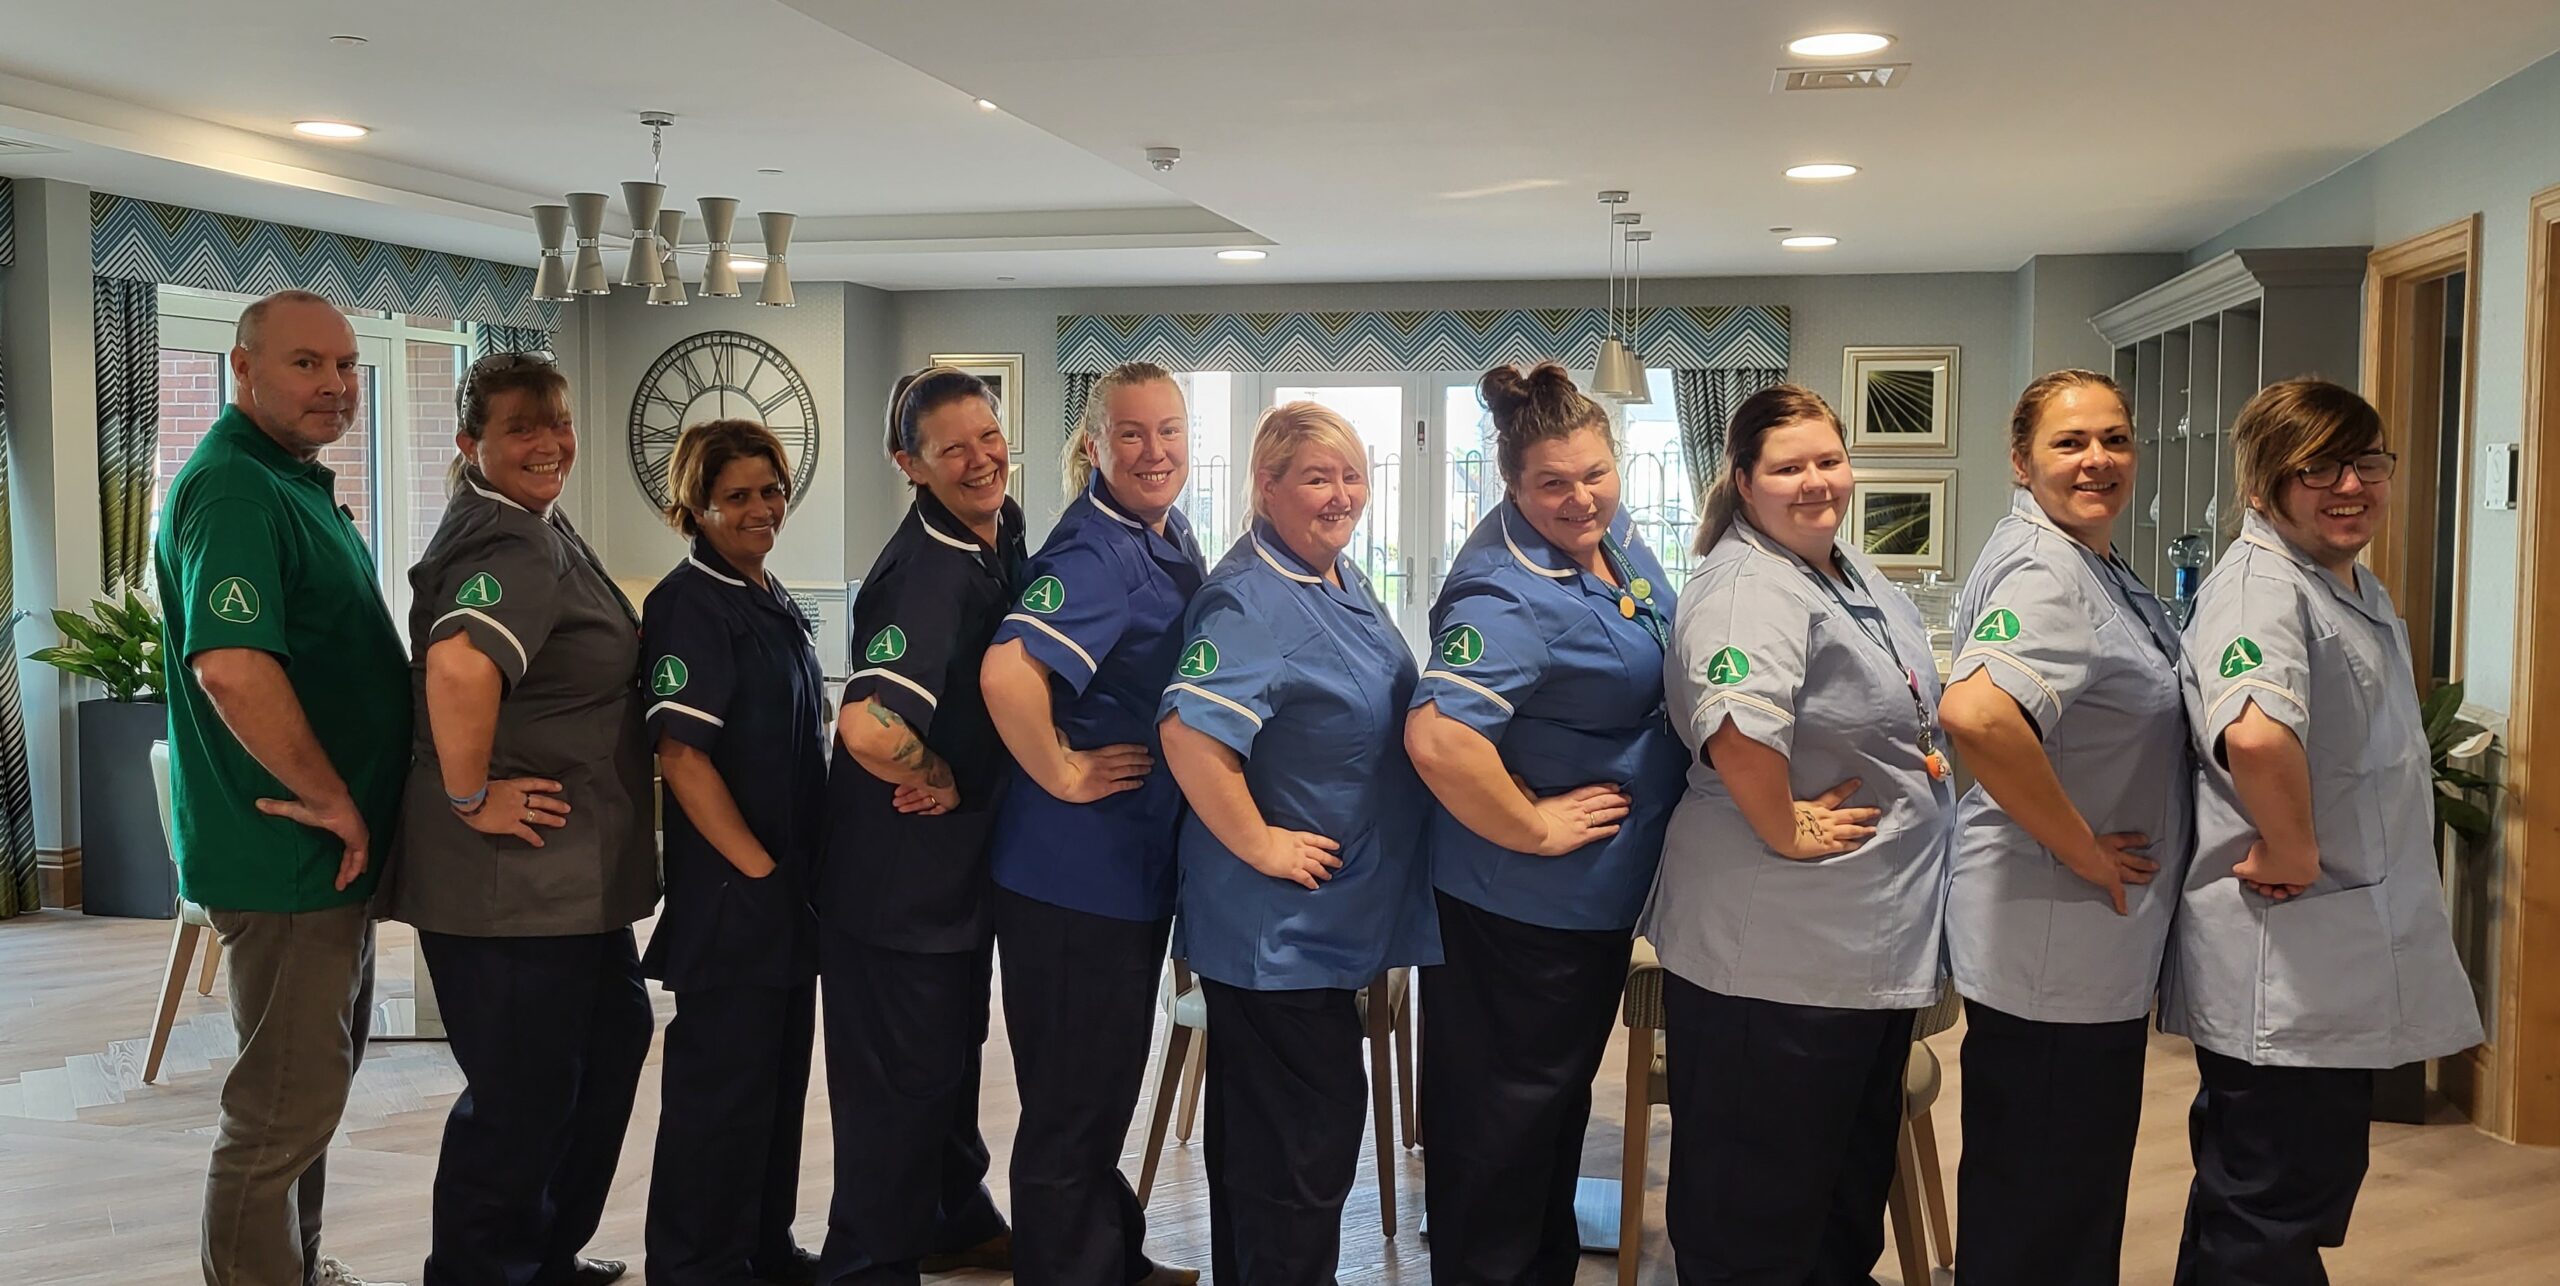 Staff at Alexander House in their uniforms